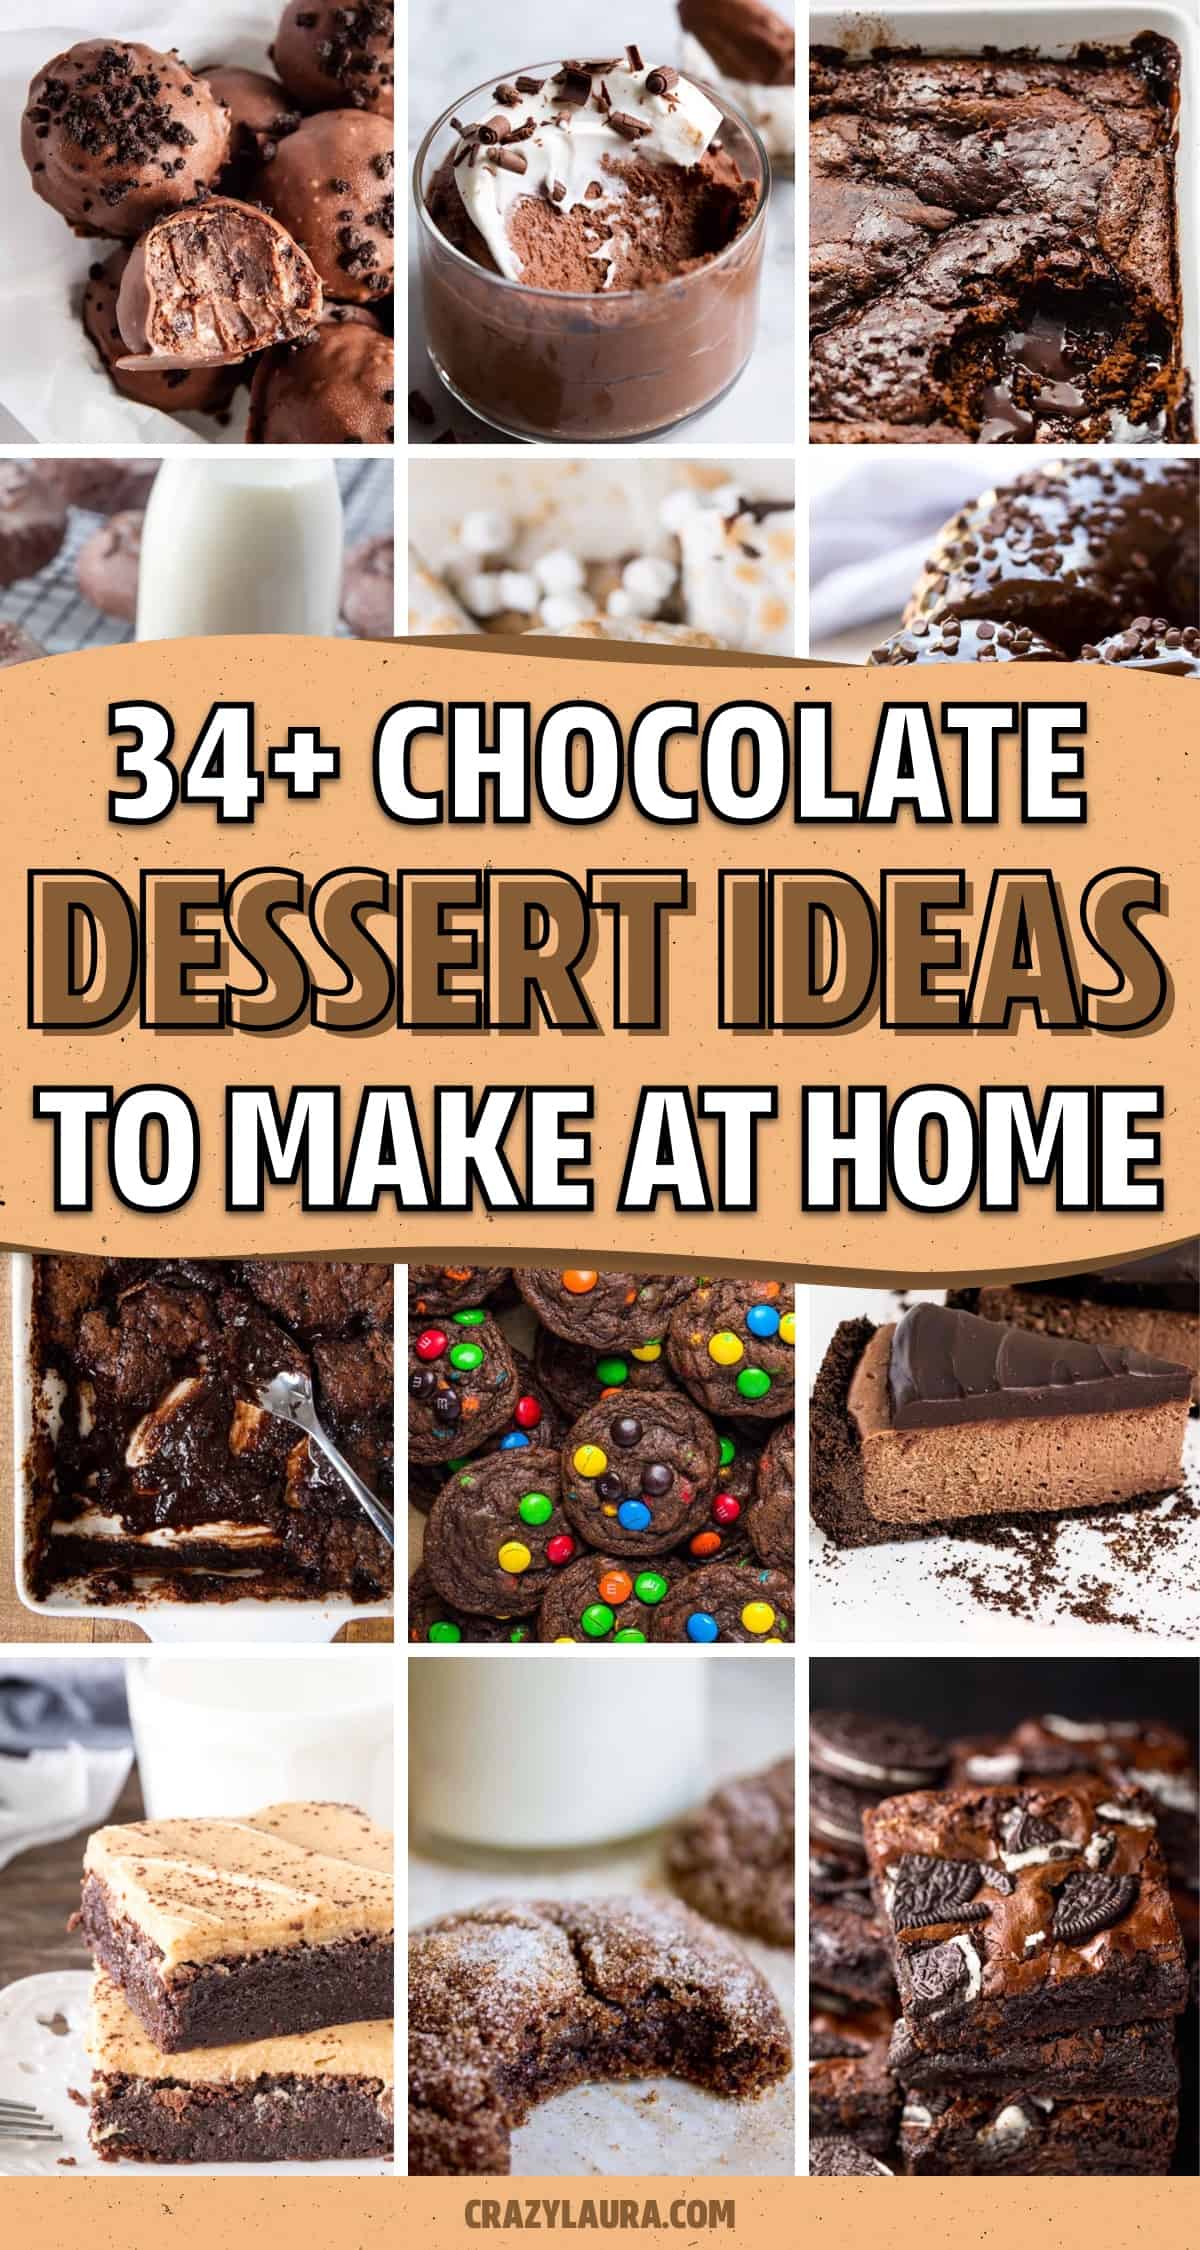 at home recipes for chocolate treats